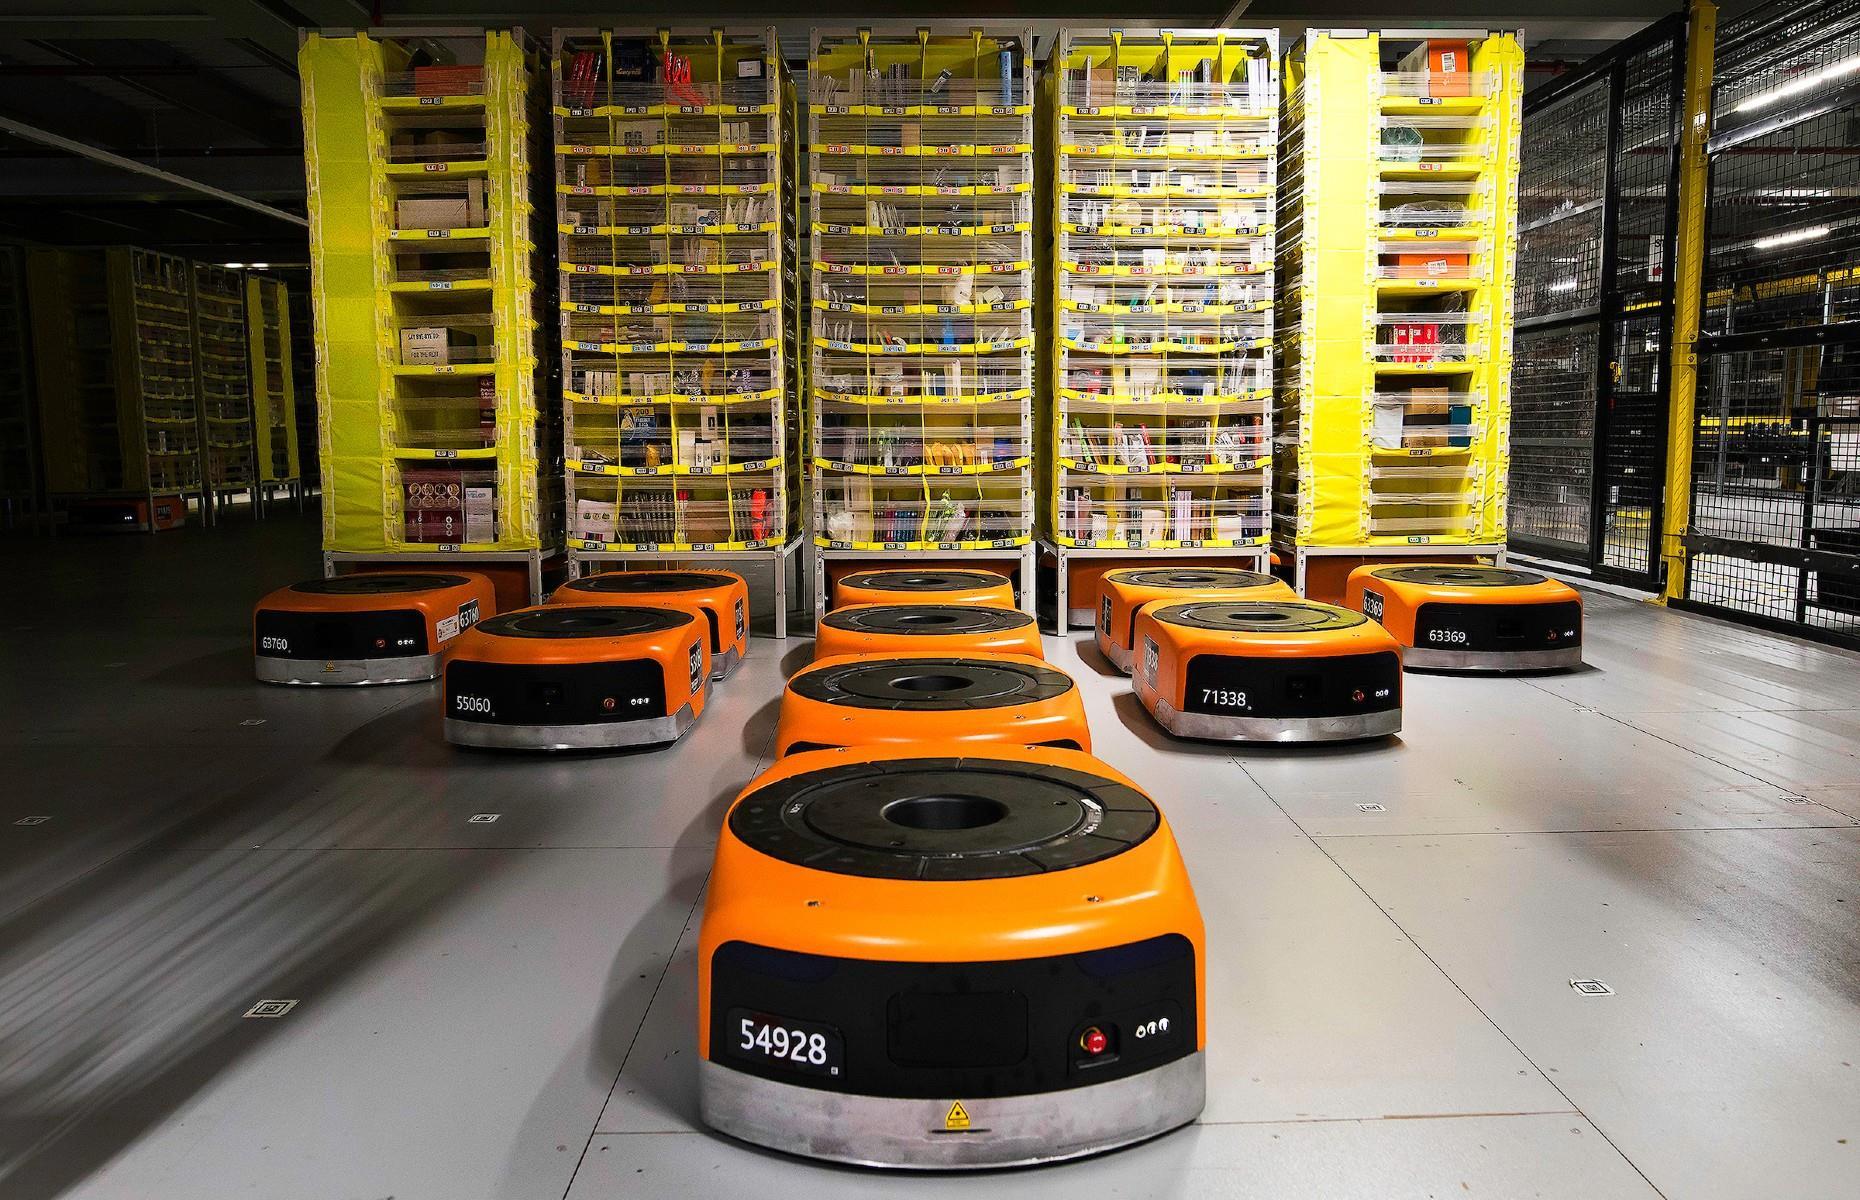 Robots are in control at Amazon